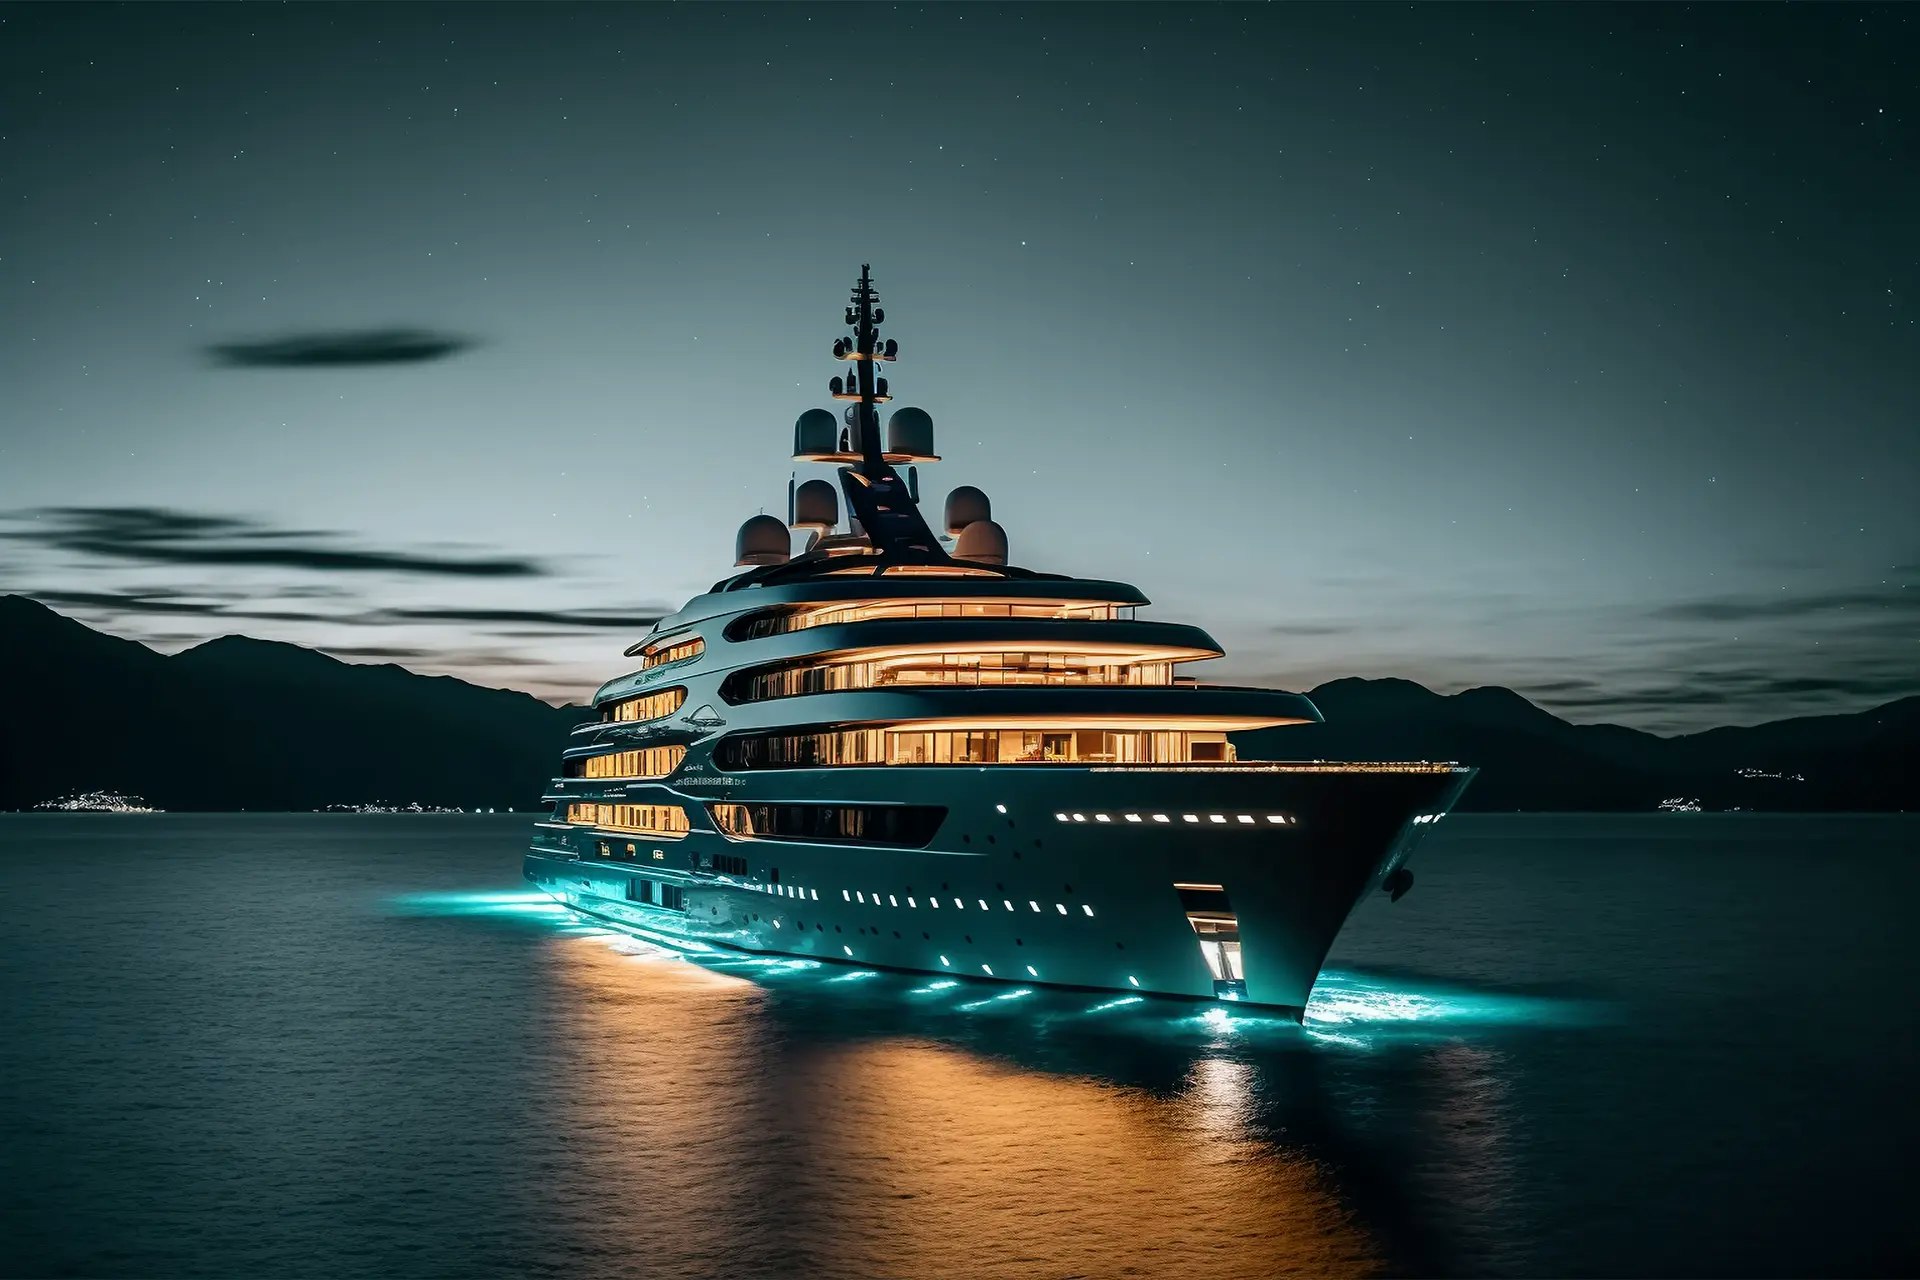 Yacht on the water